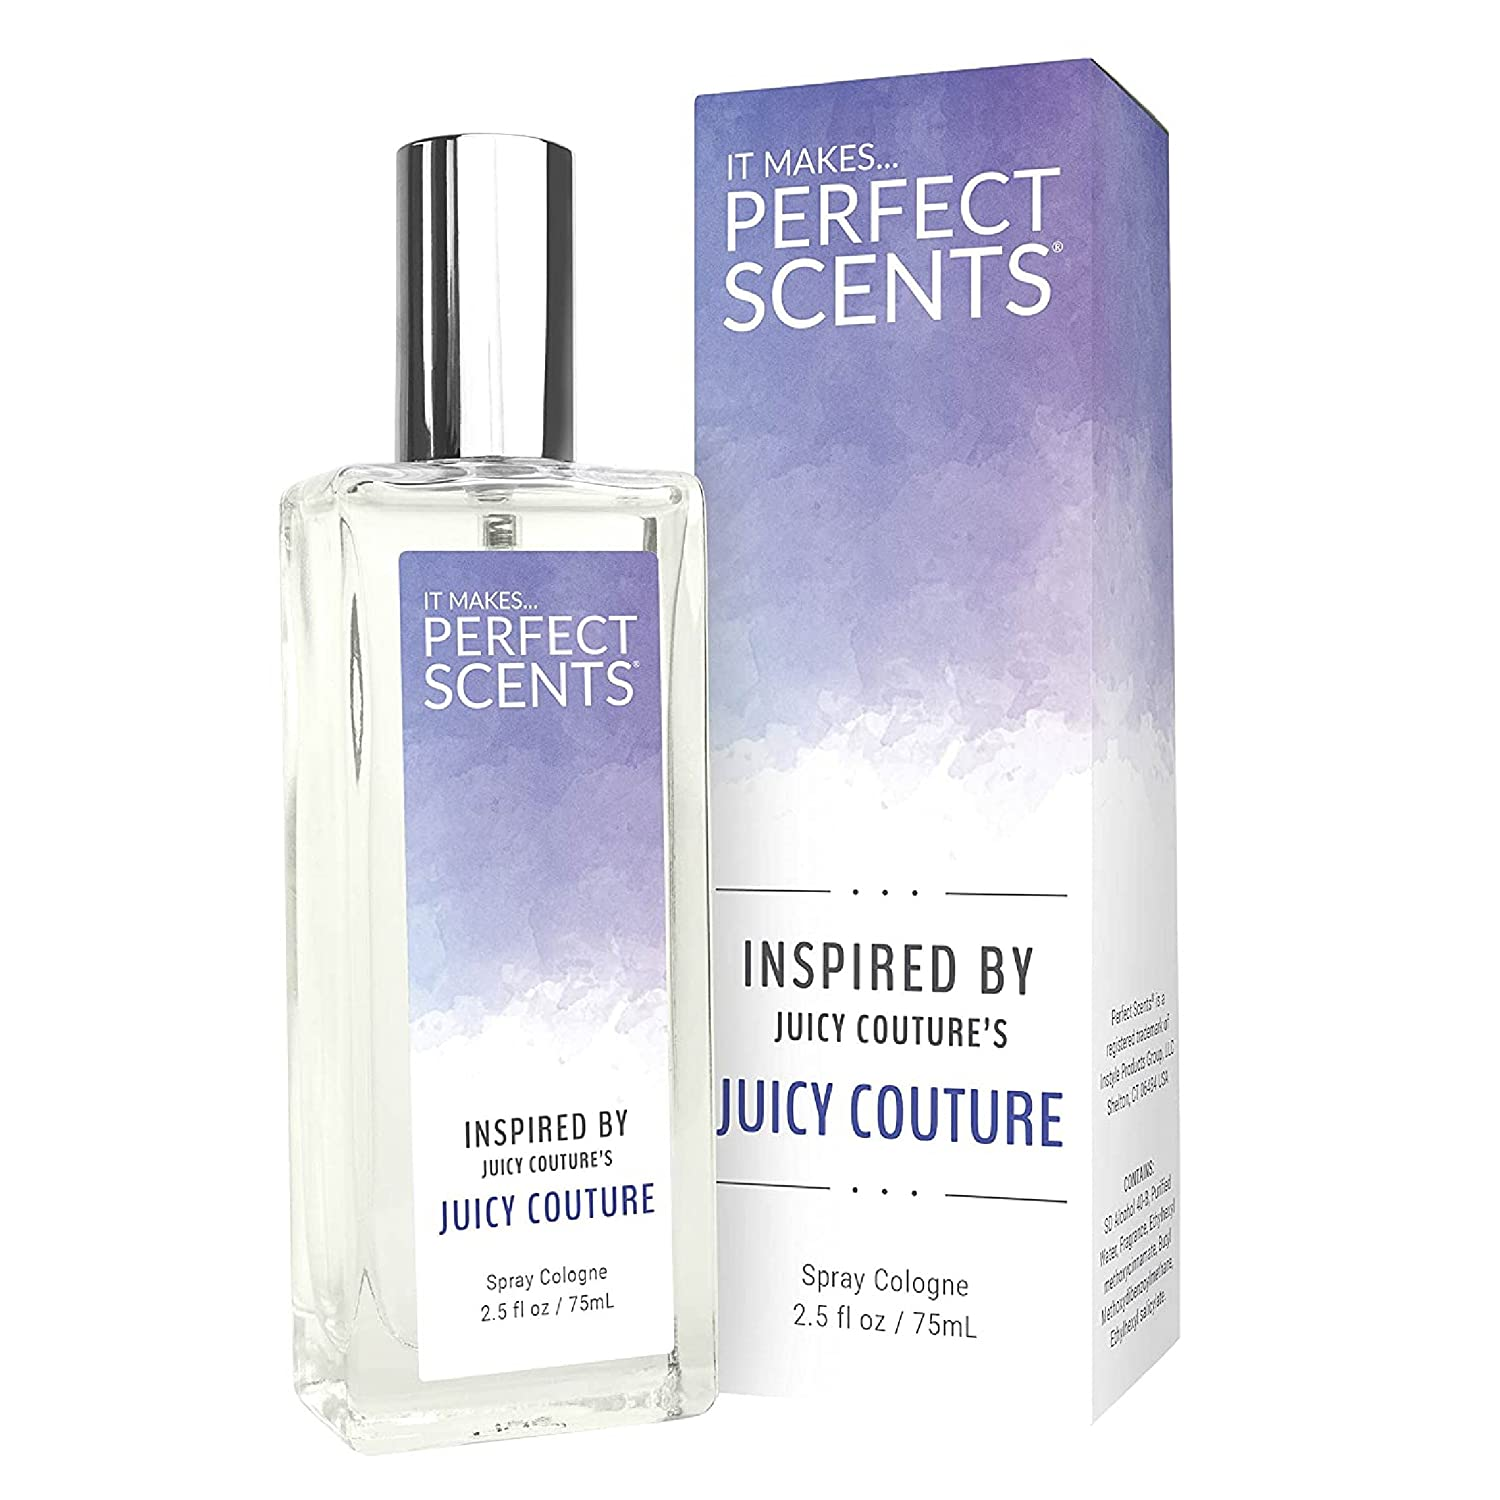 Perfect Scents Fragrances | Eternity | Cologne for Men | Vegan, Paraben Free | Never Tested on Animals | 2.5 Fluid Ounces